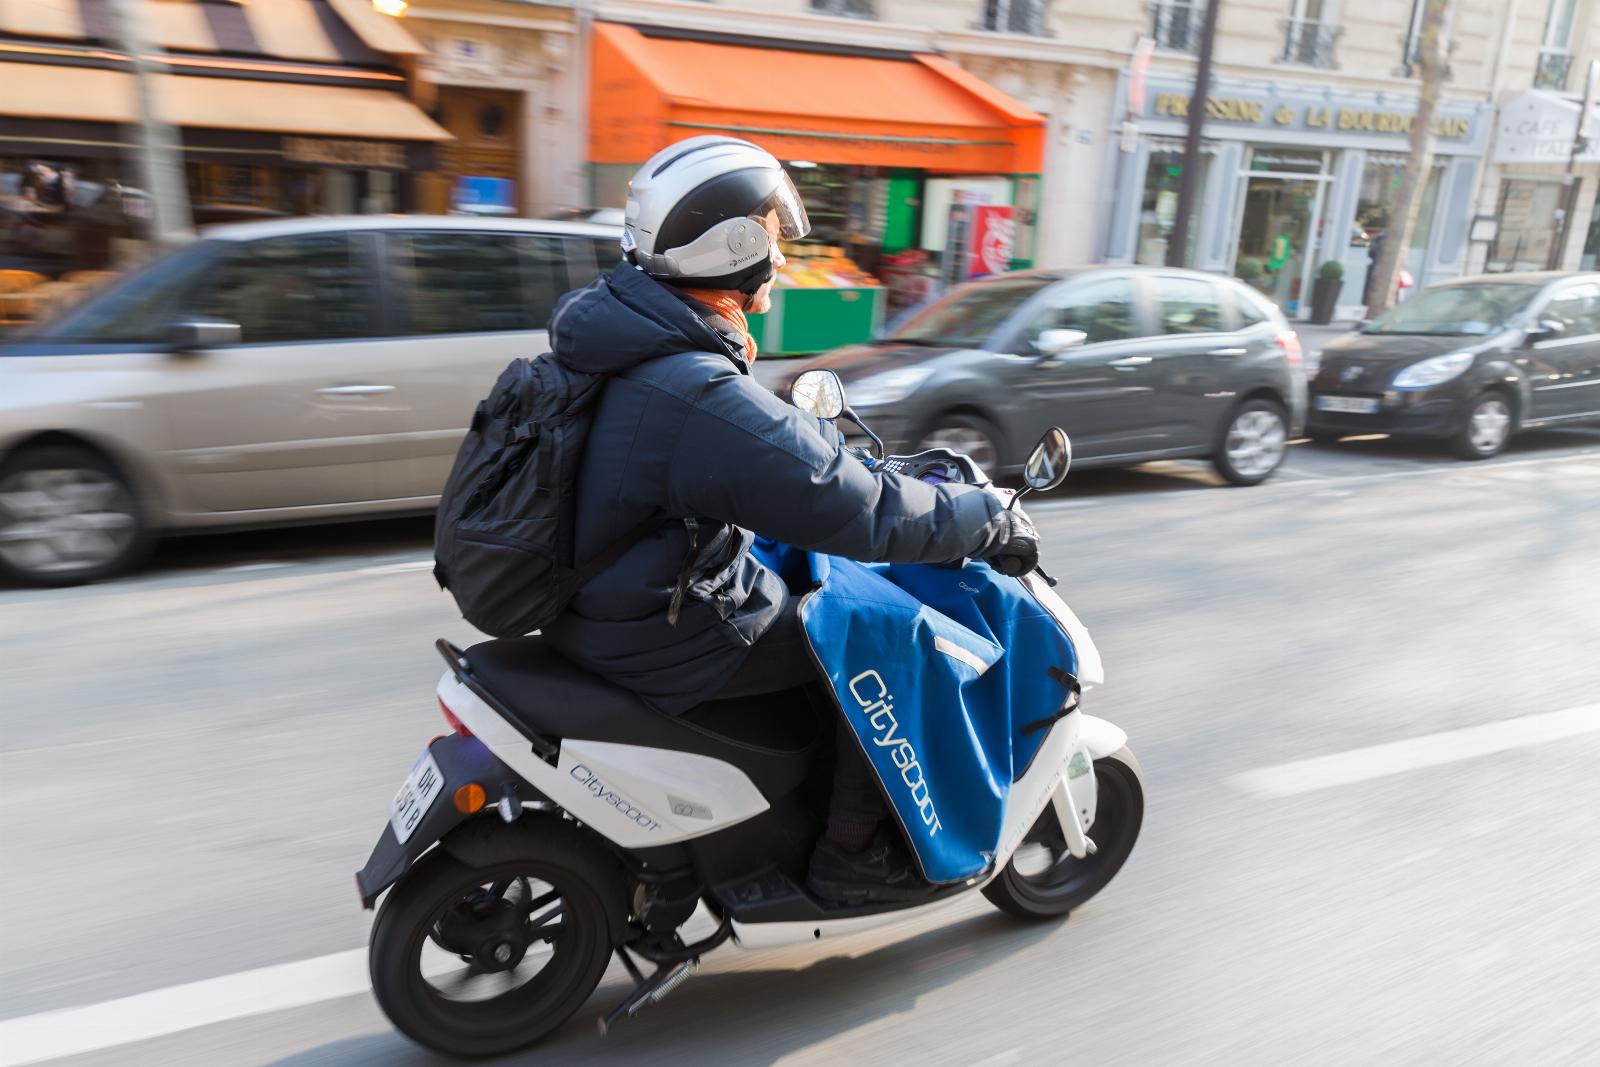 Consolidation continues in micromobility as Cooltra snaps up Cityscoot